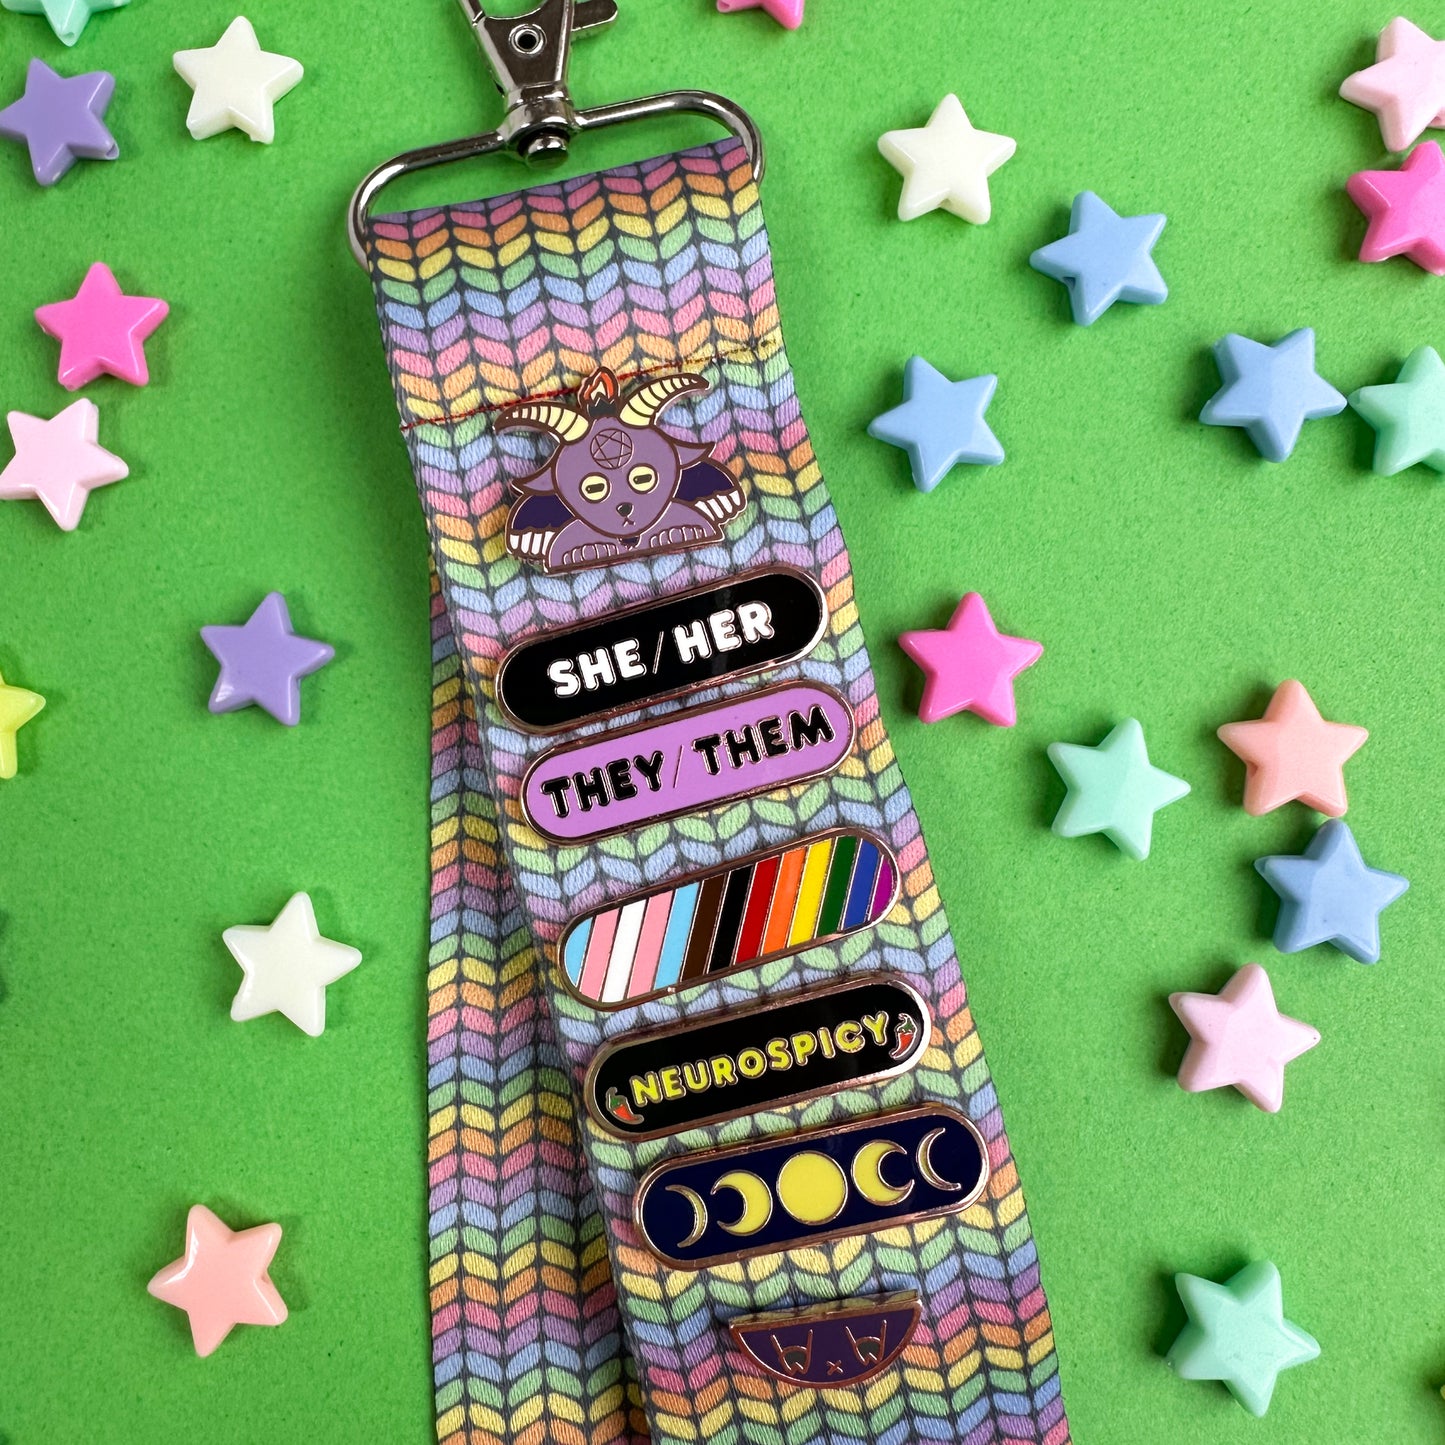 A woven lanyard with a pastel rainbow stockinette stitch graphic printed on it with a silver metal lobster claw clasp at the bottom.  The Lanyard has a Baphomet Pride Pal displayed on it with a black She/Her Plaque, a purple They/Them plaque, an inclusive Pride Plaque, a Neurospicy Plaque, and a Moon Phases Plaque. 